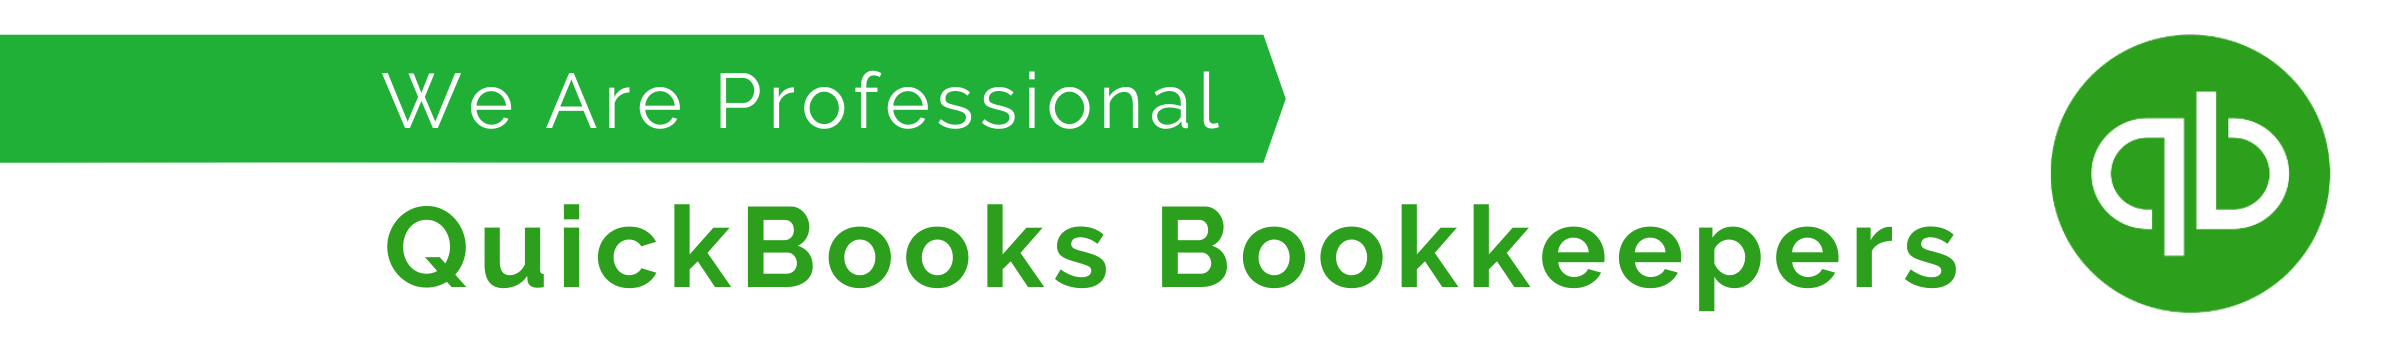 We Are Professional QuickBooks Bookkeepers